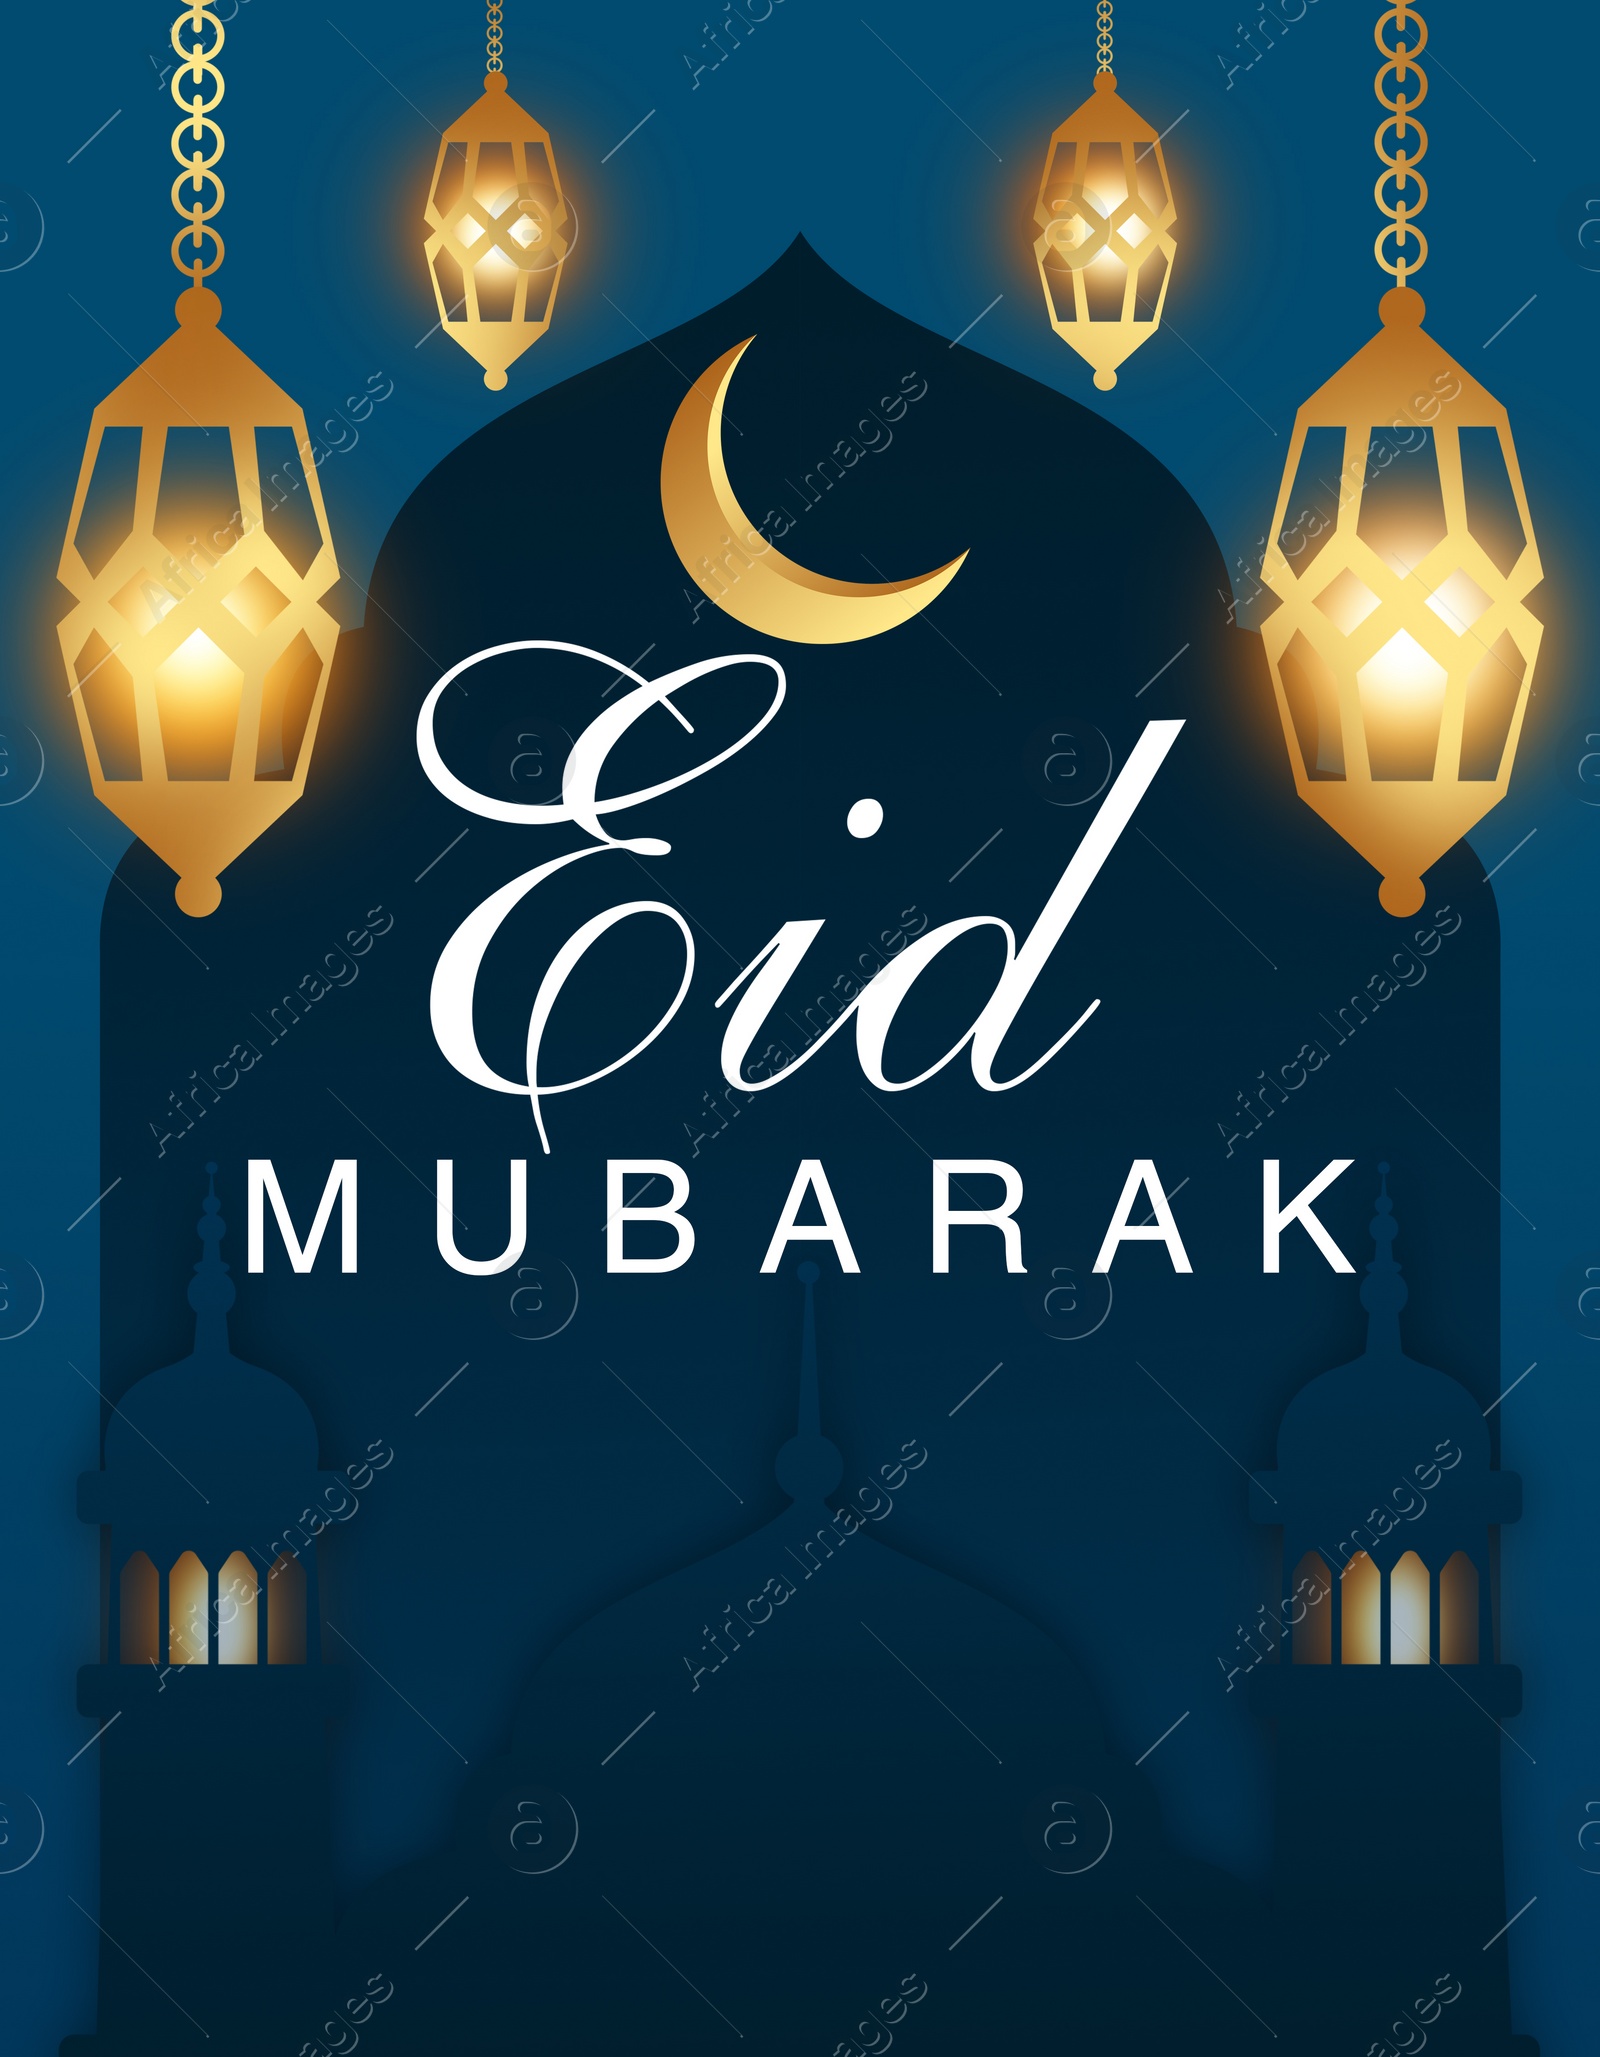 Illustration of Eid Mubarak greeting card with illustrations of crescent moon, Muslim lanterns and mosque on dark blue background